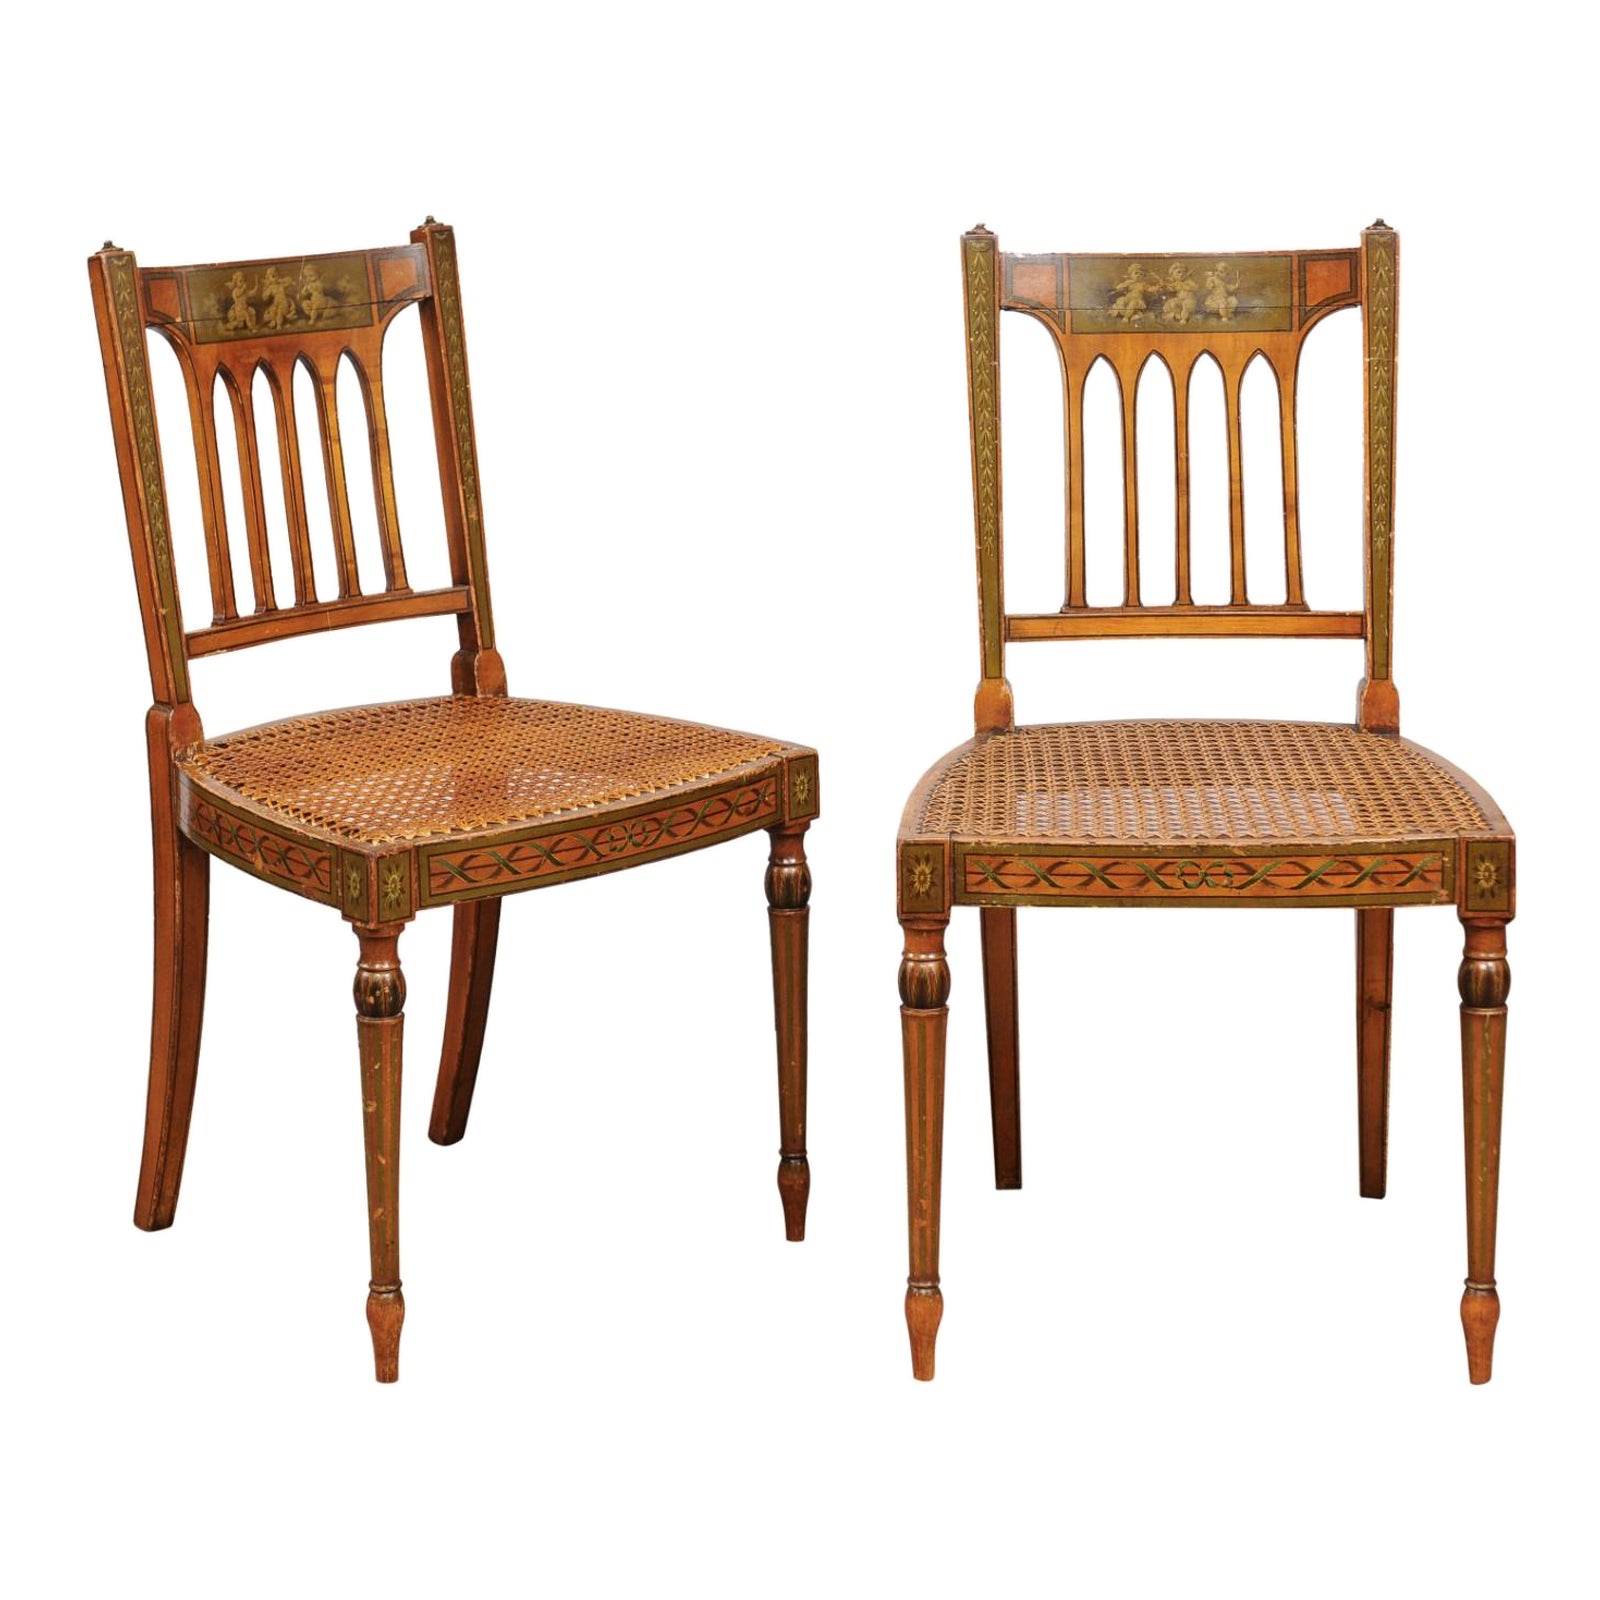 Pair of George III Satinwood Side Chairs with Grisaille Painted Backsplats